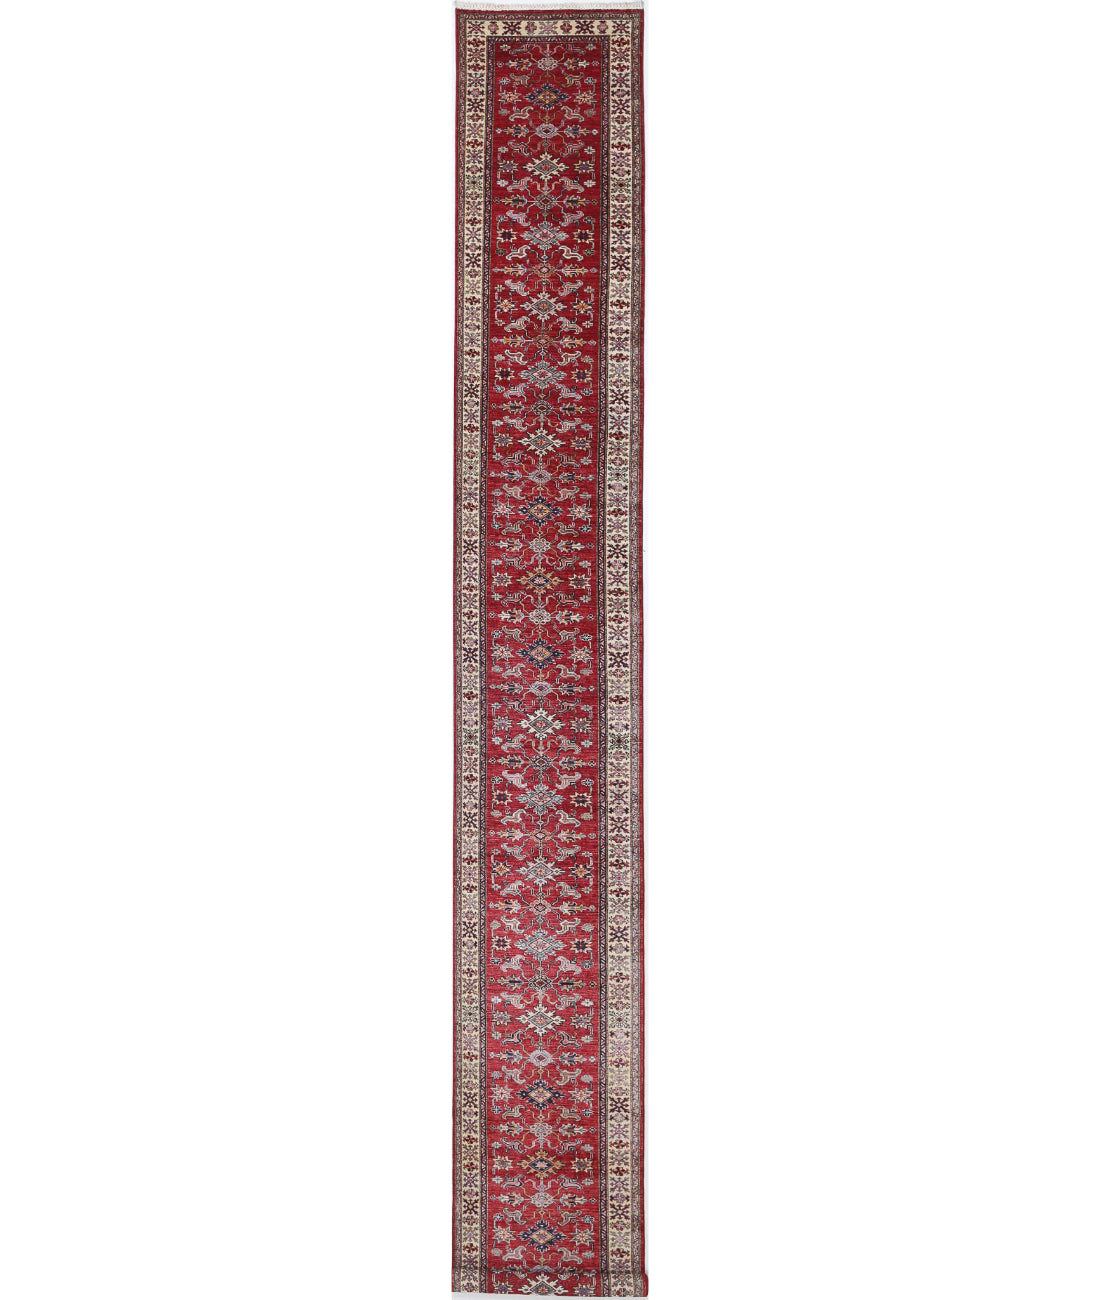 Hand Knotted Royal Kazak Wool Rug - 2&#39;7&#39;&#39; x 23&#39;0&#39;&#39; 2&#39;7&#39;&#39; x 23&#39;0&#39;&#39; (78 X 690) / Red / Ivory